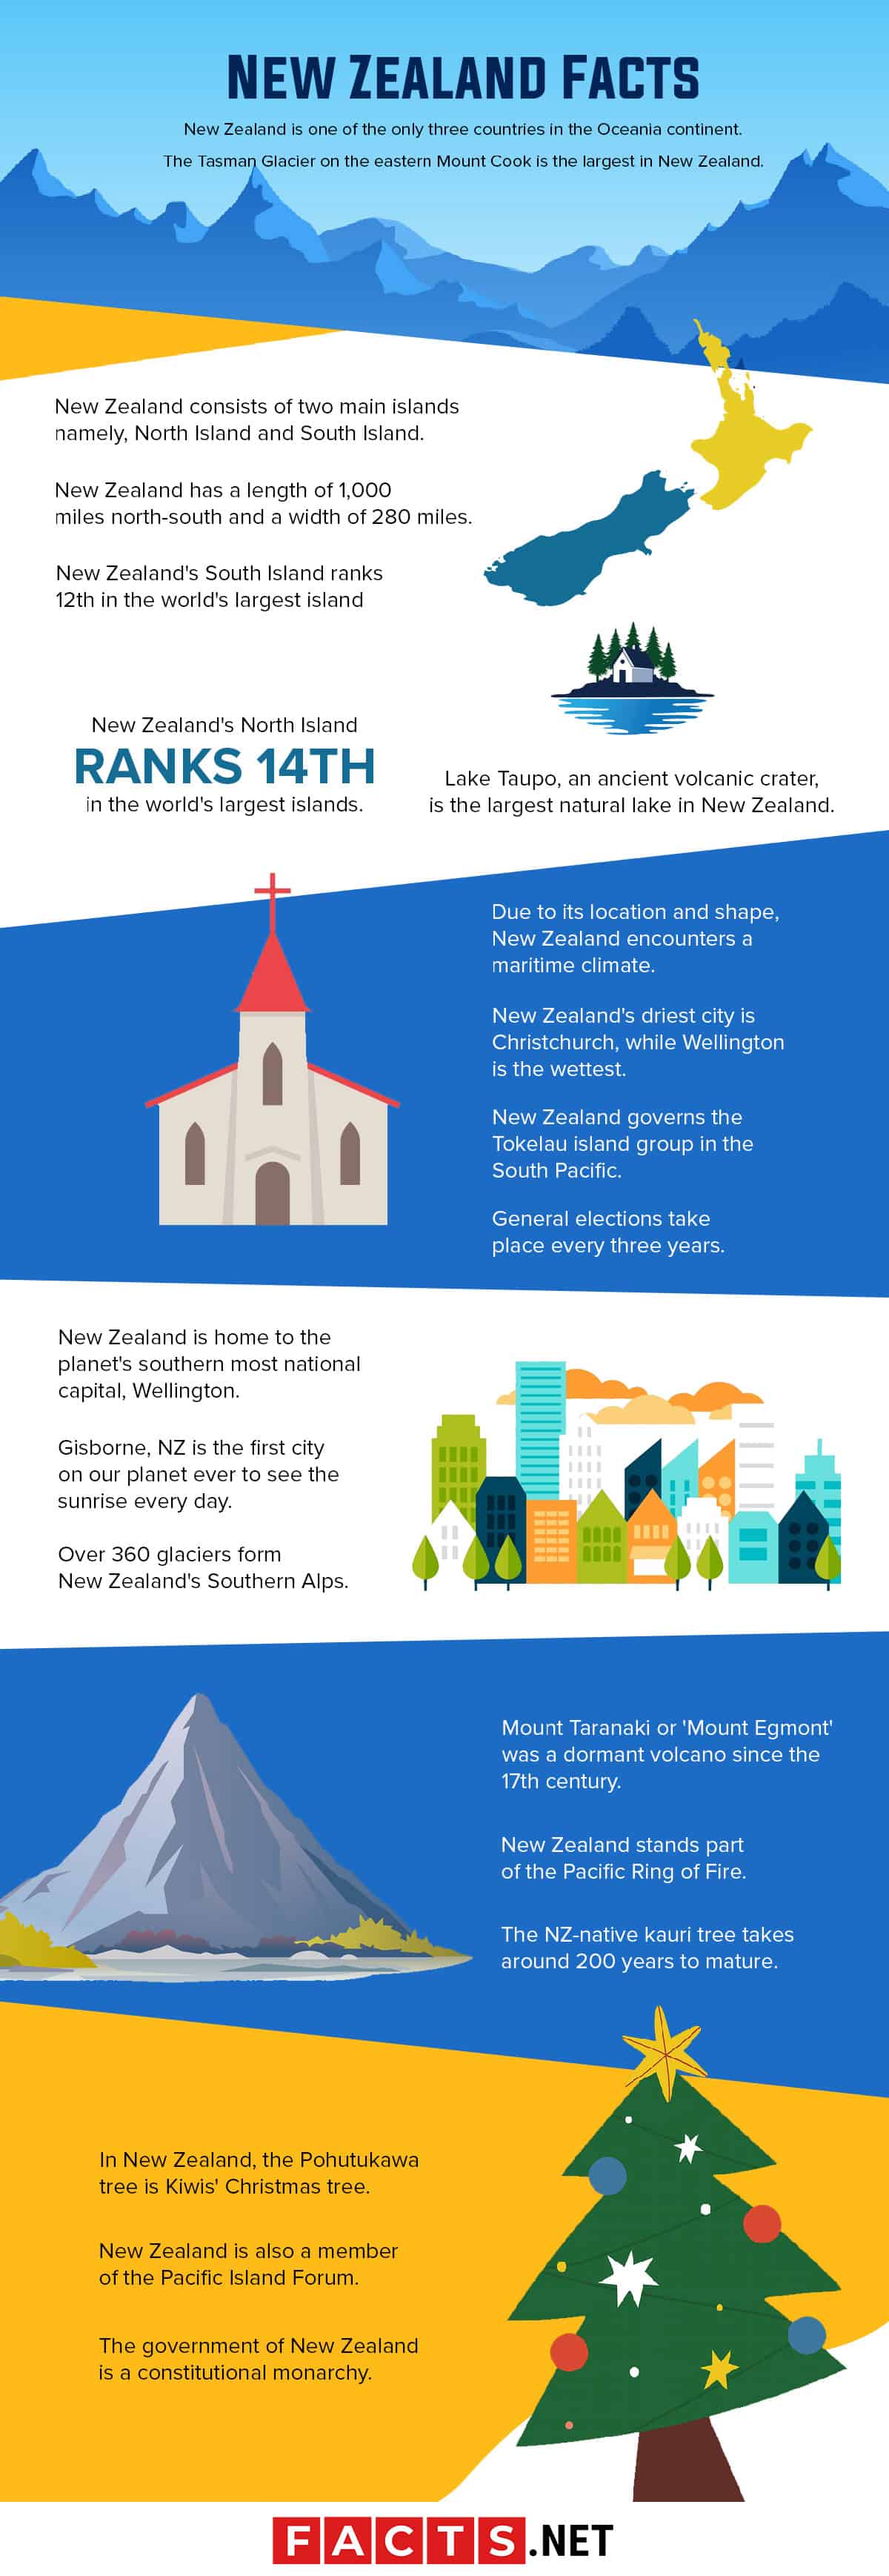 100-amazing-facts-about-new-zealand-only-the-kiwis-know-facts